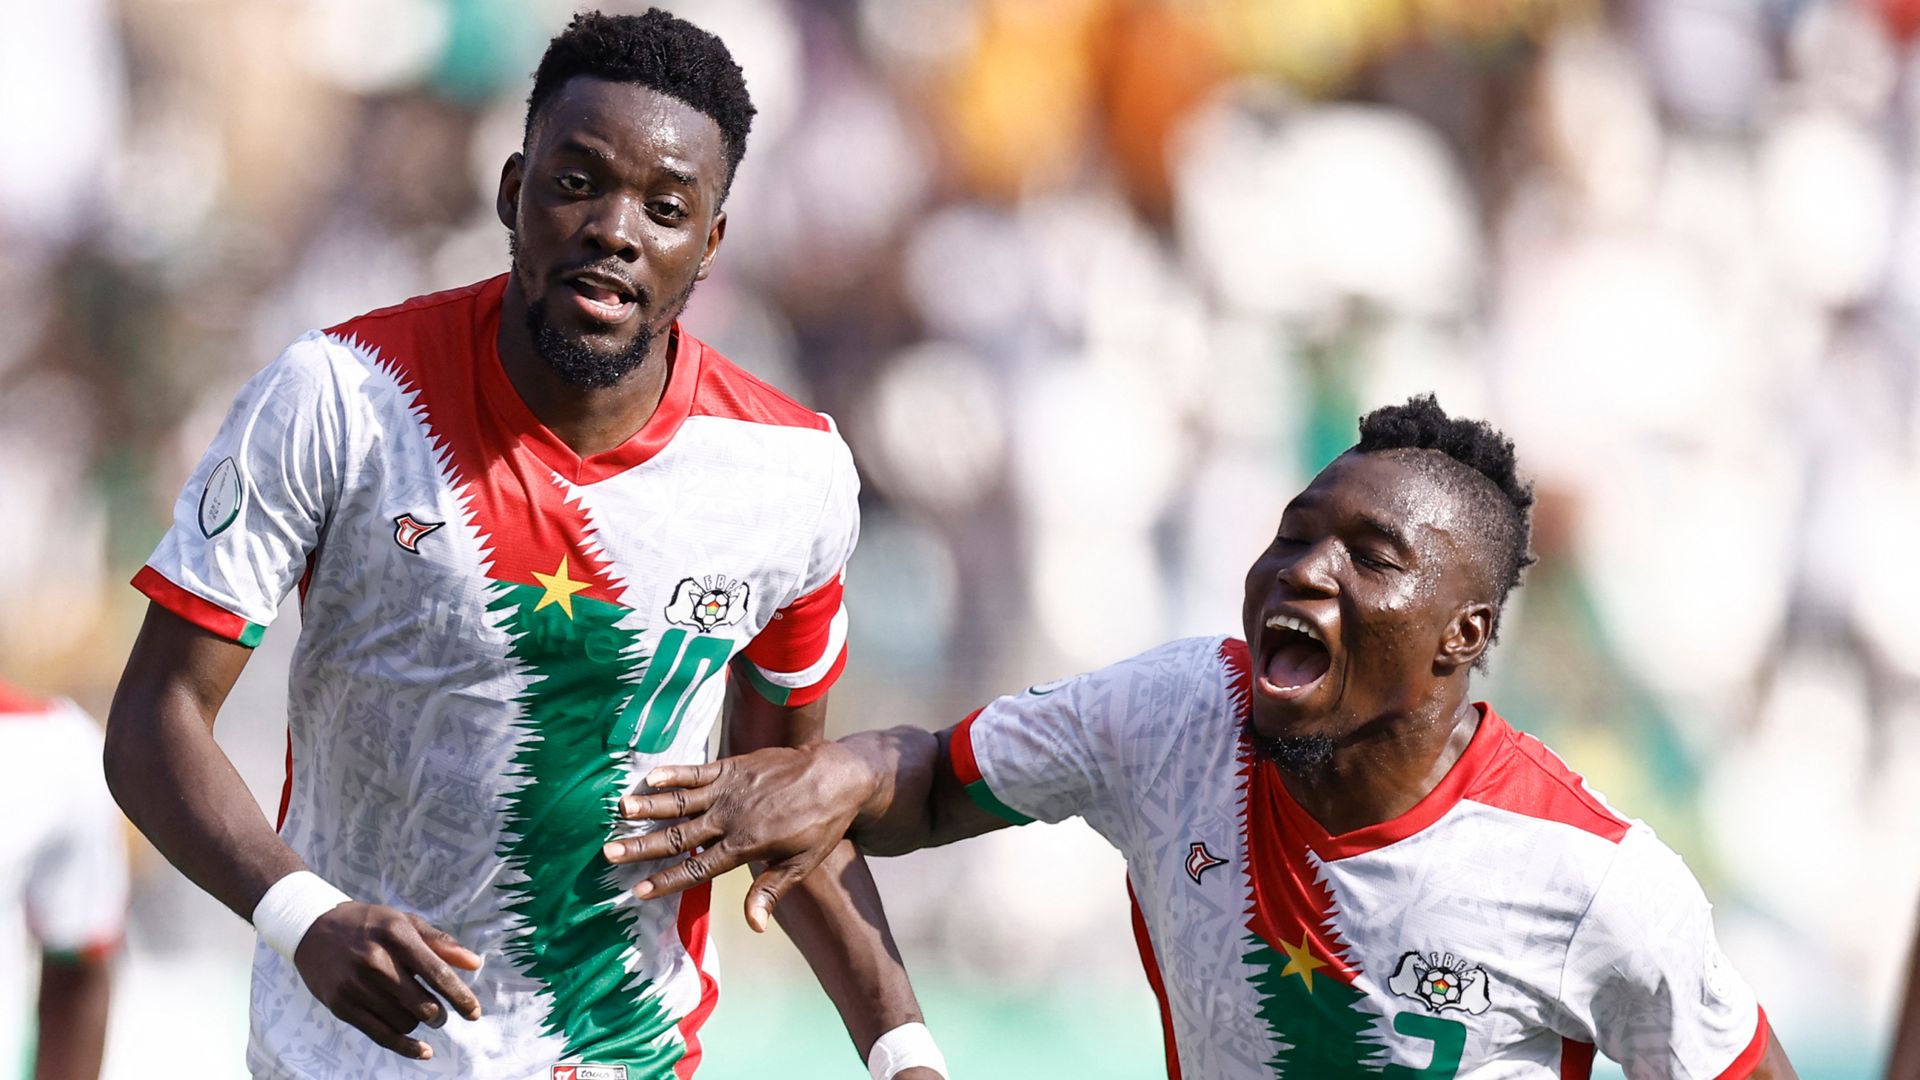 AFCON round-up: Wins for Burkina Faso and Mali as Namibia make history